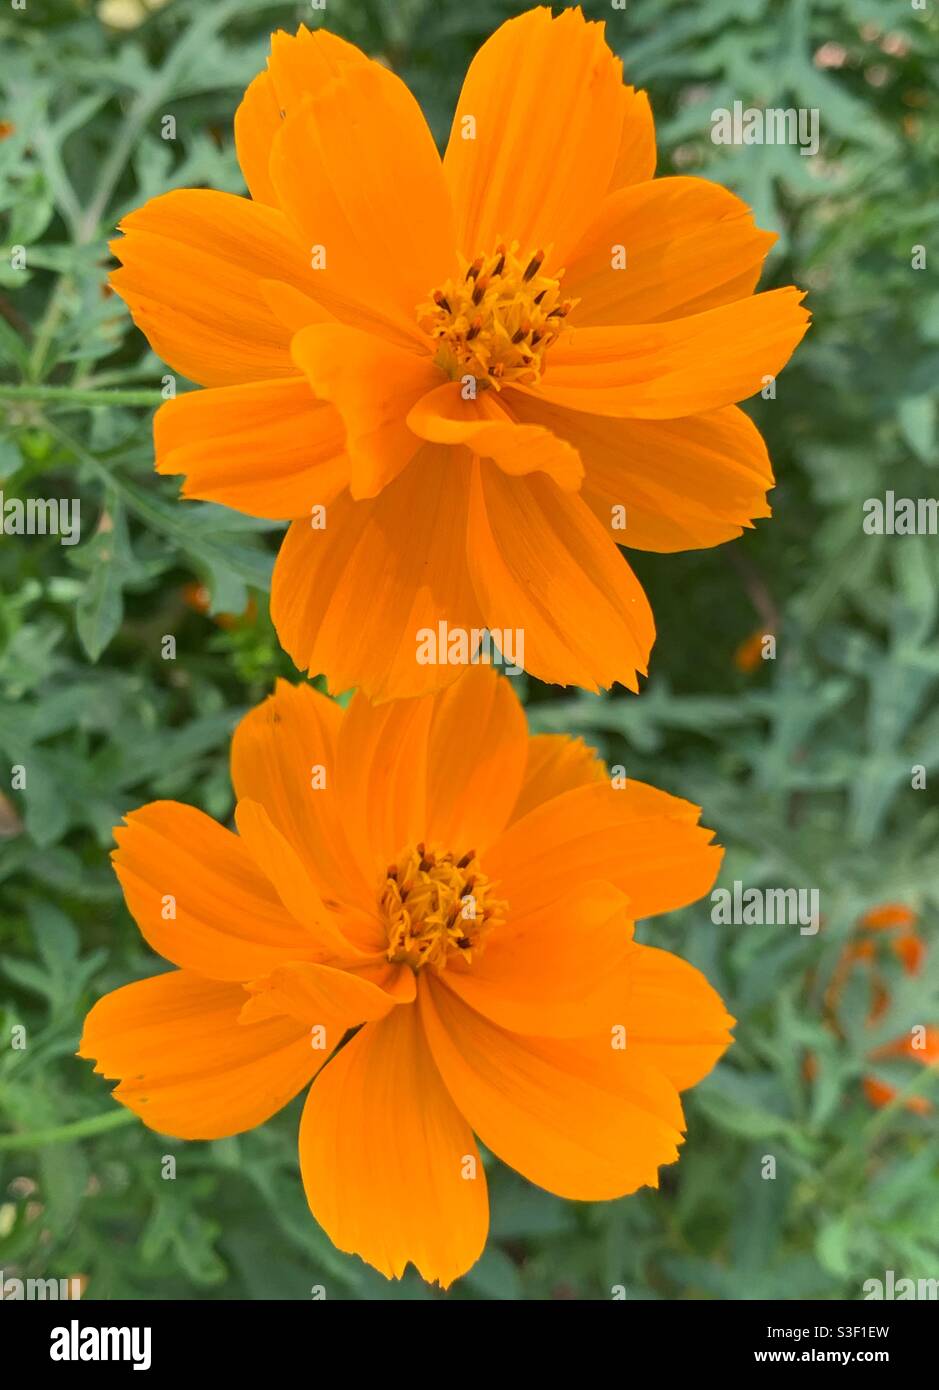 Orange cosmos flowers with green leaves Stock Photo